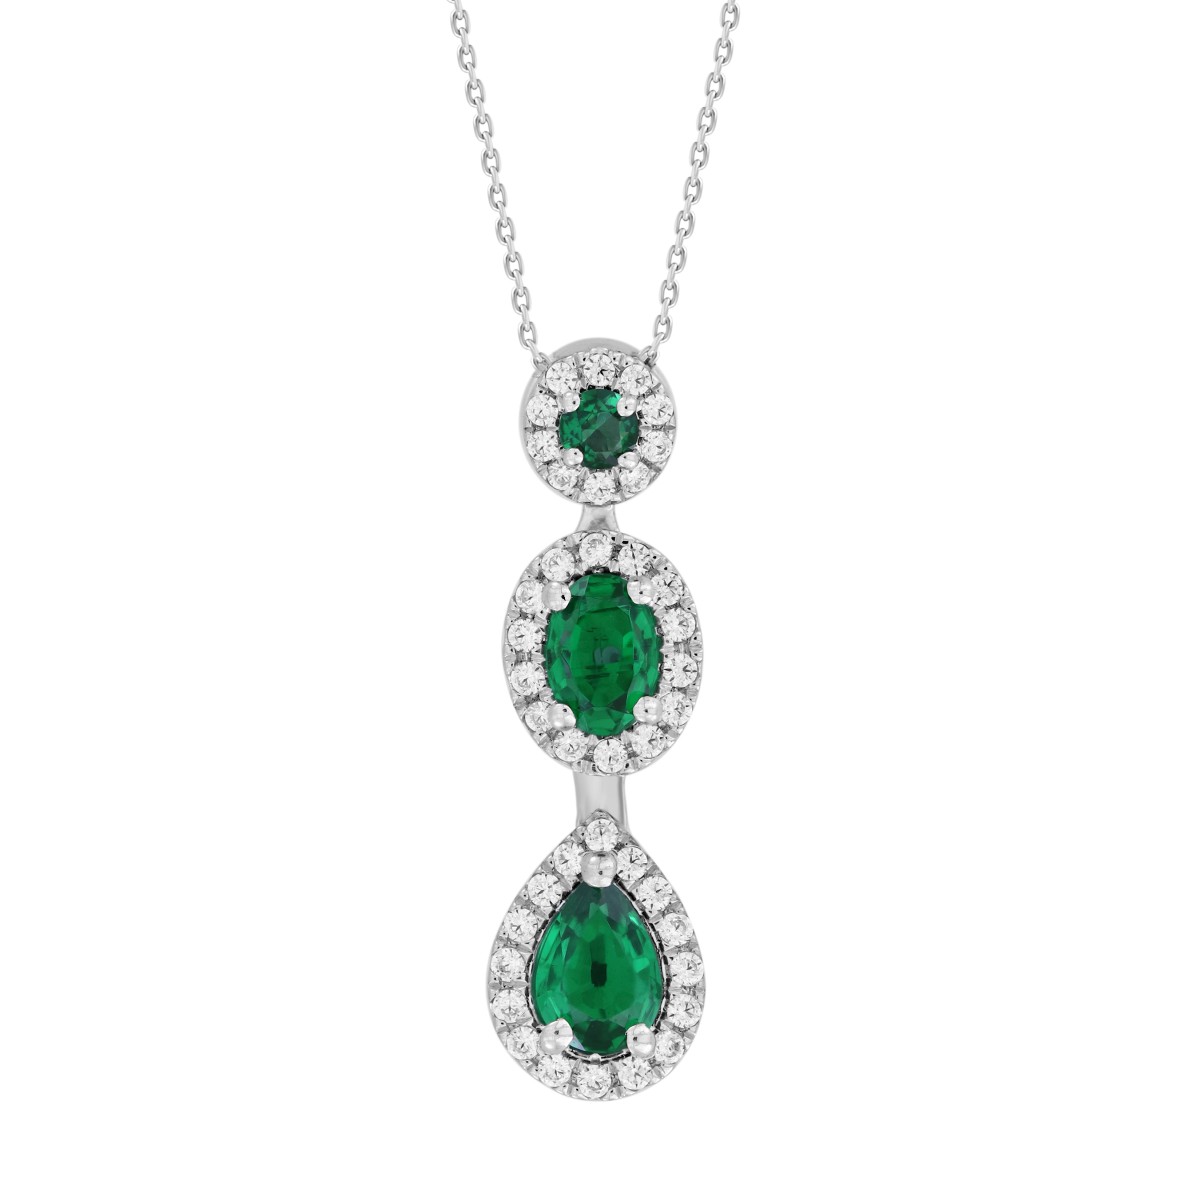 18K WHITE GOLD 1 7/8CT ROUND/PEAR/OVAL DIAMOND LADIES PENDANT WITH CHAIN(COLOR STONE ROUND/PEAR/OVAL/EMERALD DIAMOND 1 3/8CT)